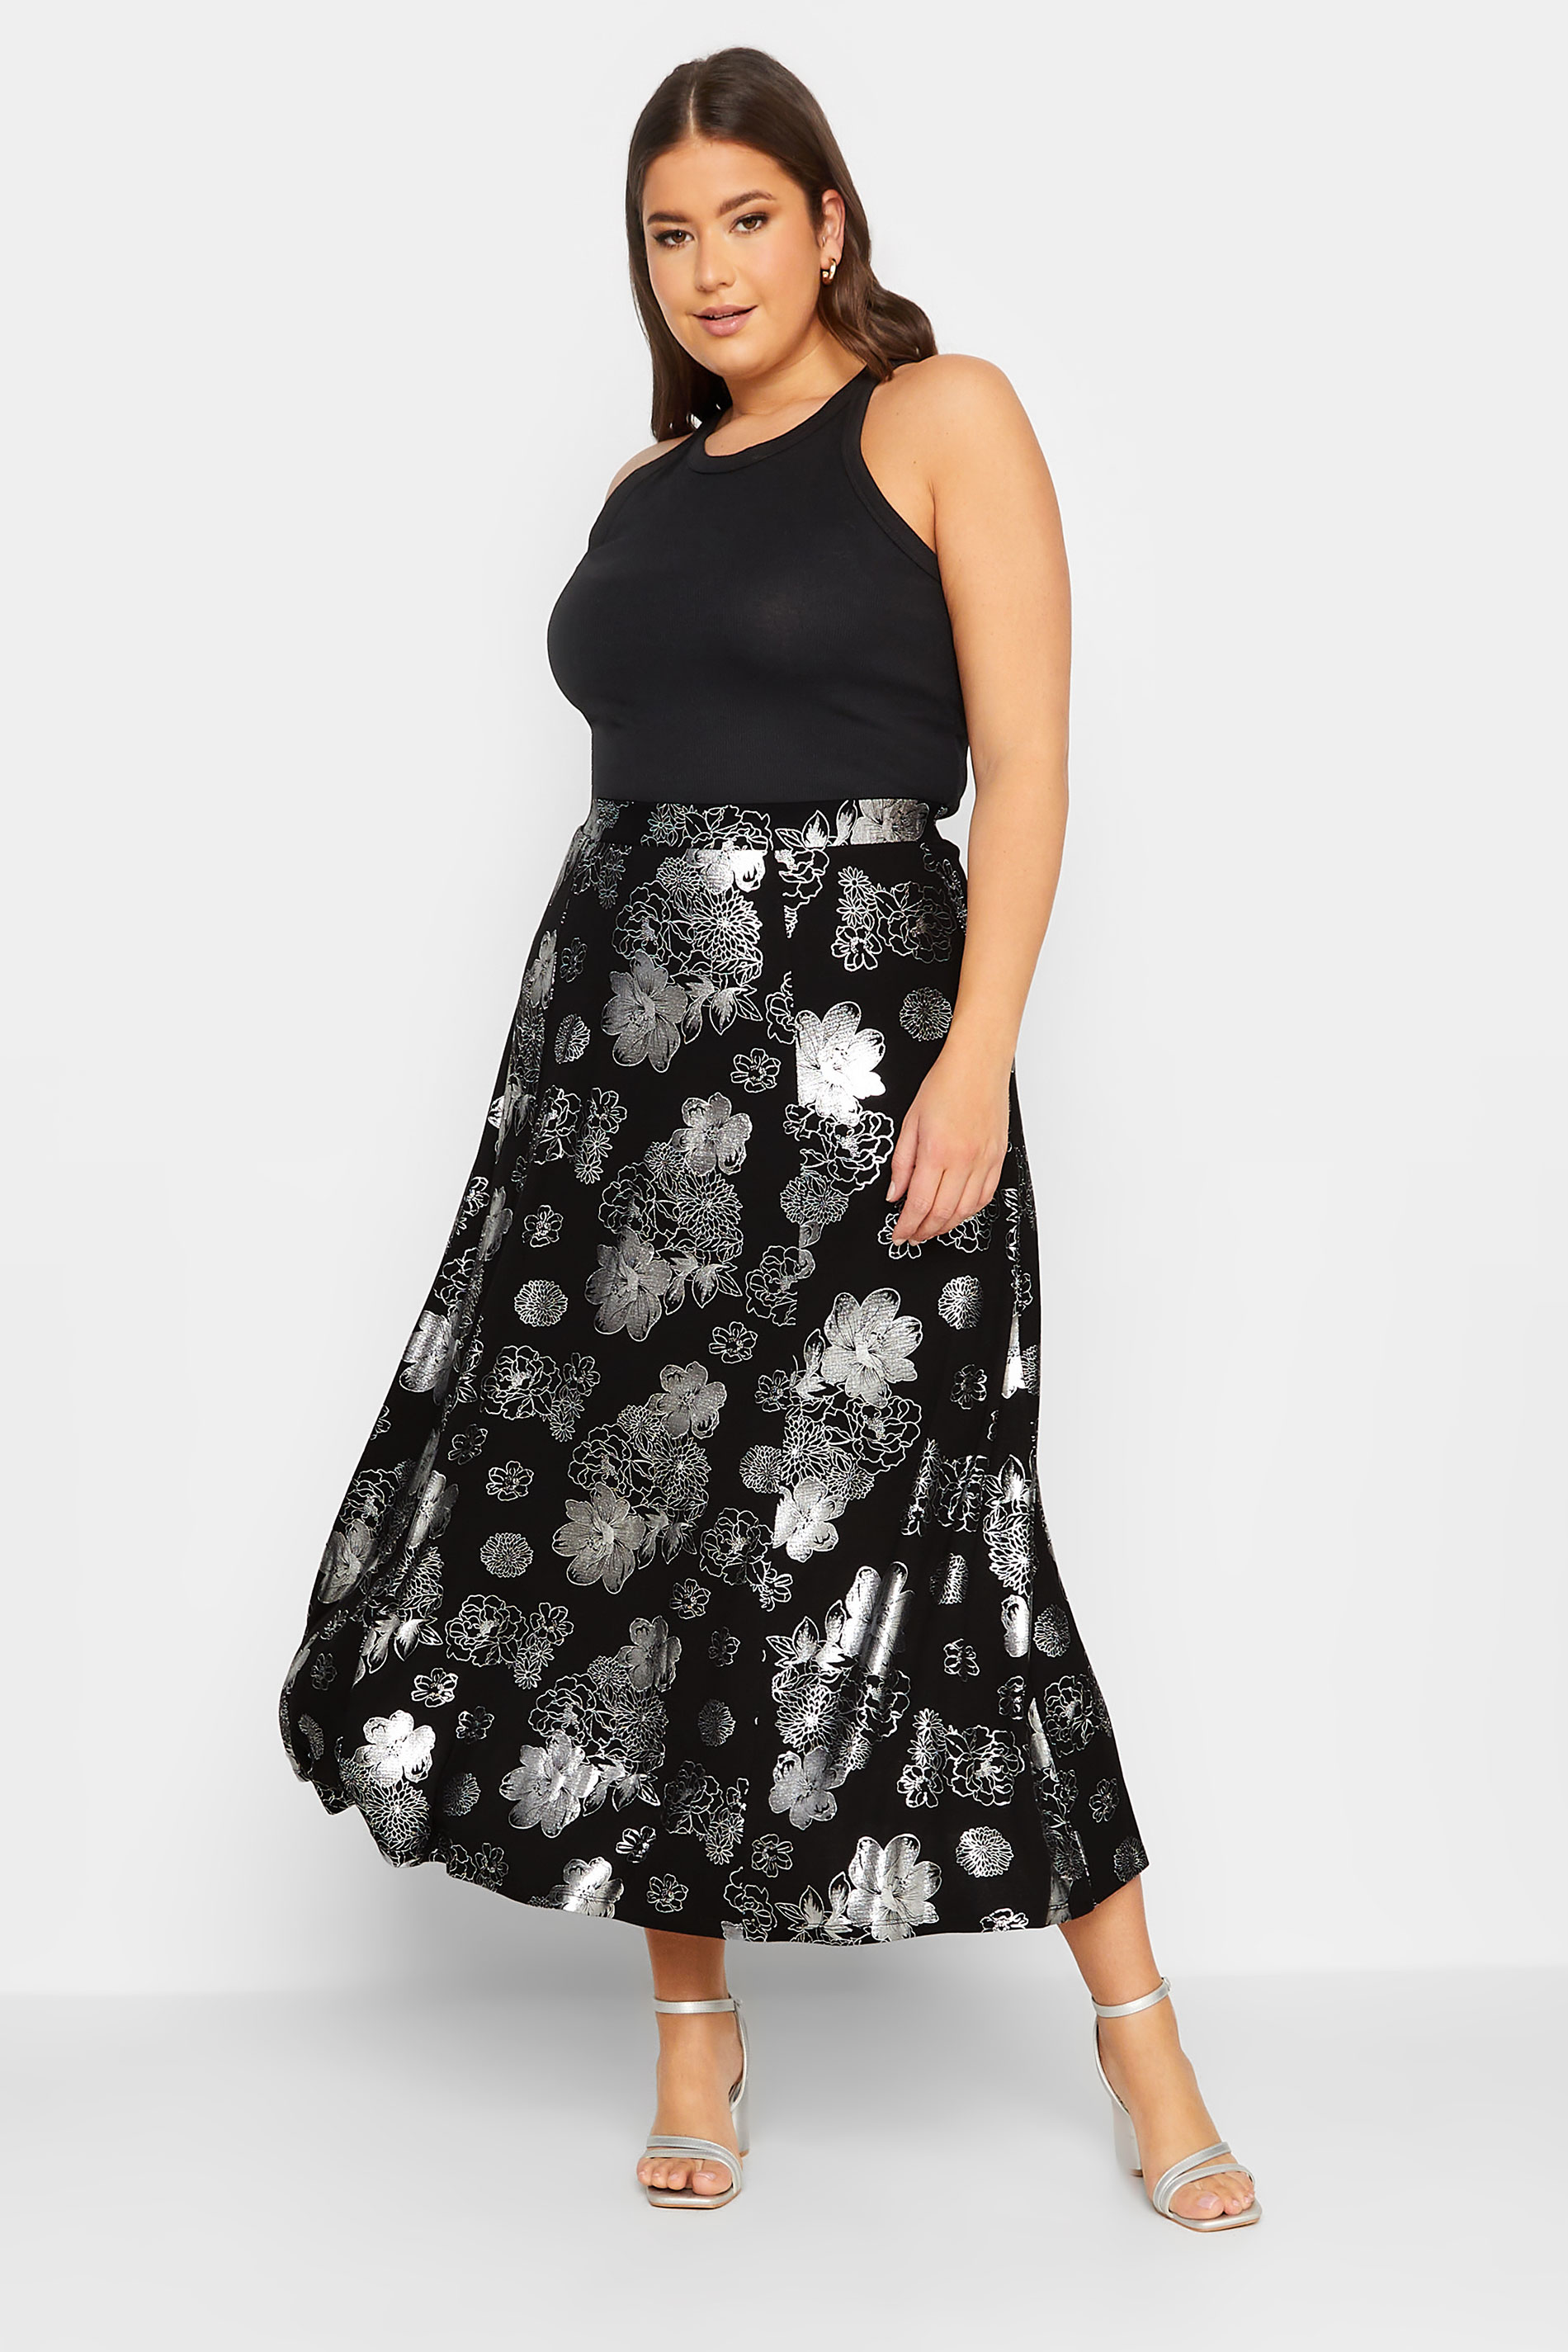 YOURS LUXURY Plus Size Black & Silver Floral Foil Printed Skirt | Yours Clothing 2